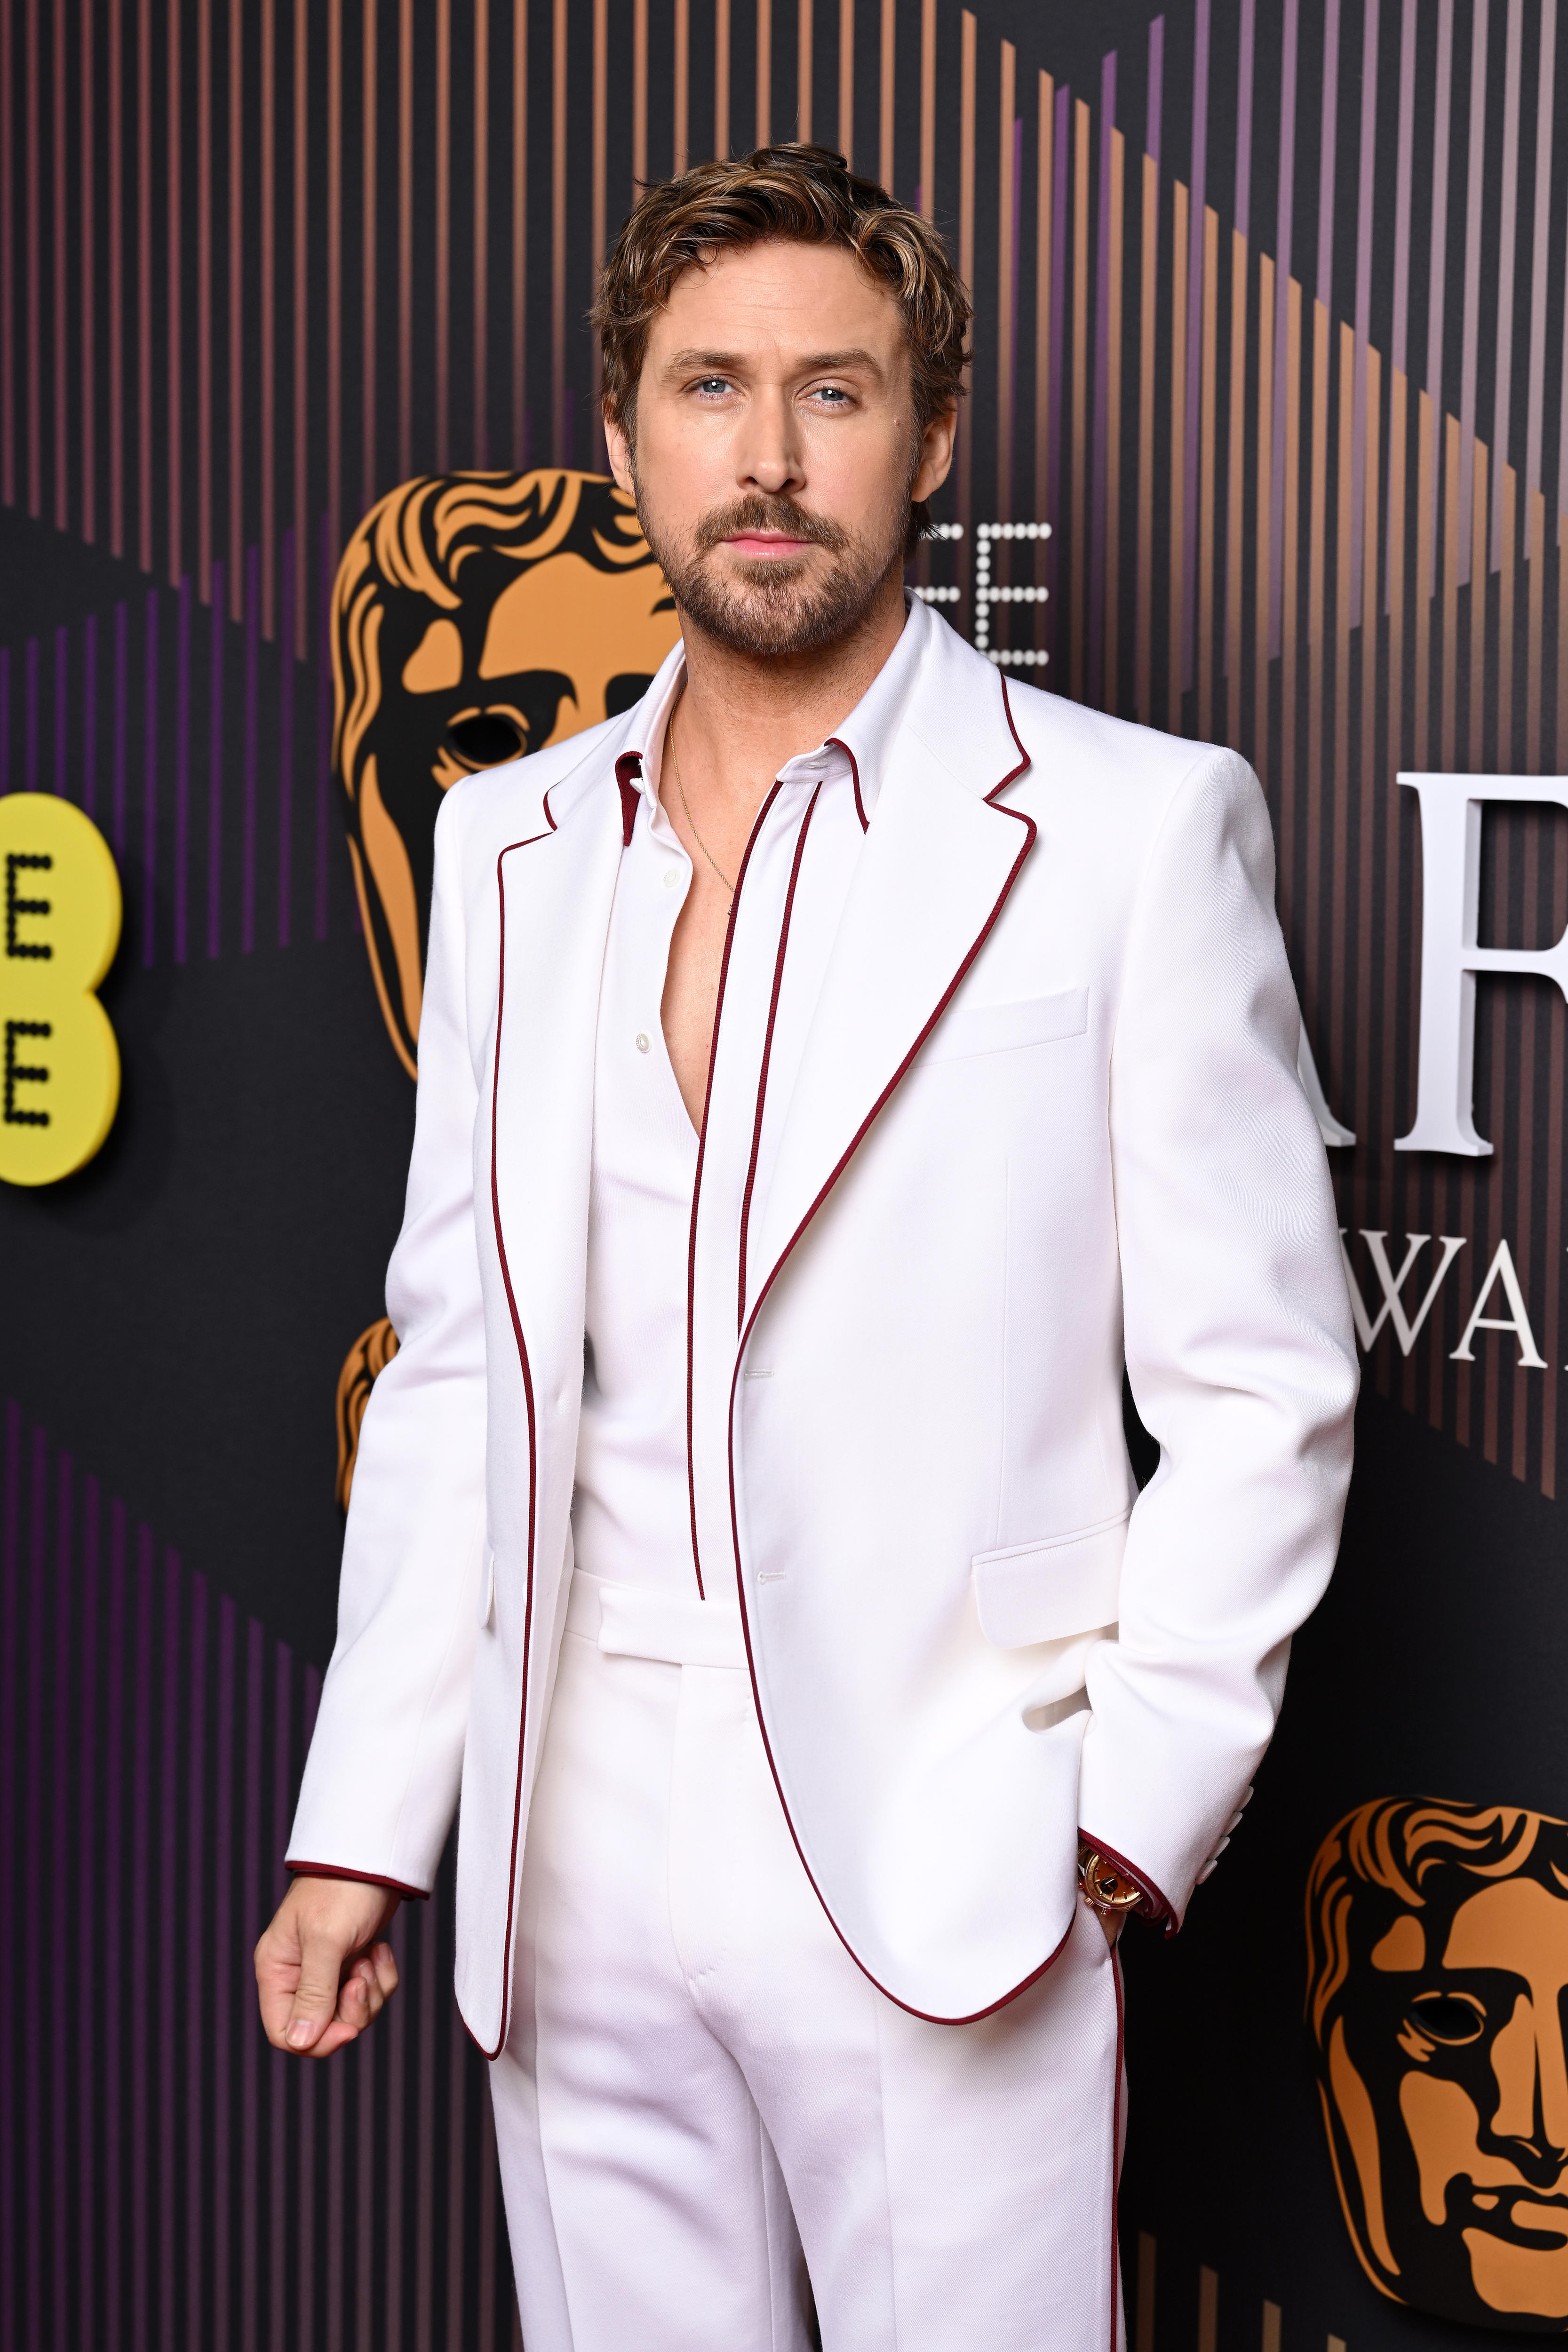 Ryan Gosling on the red carpet wearing an all white suit